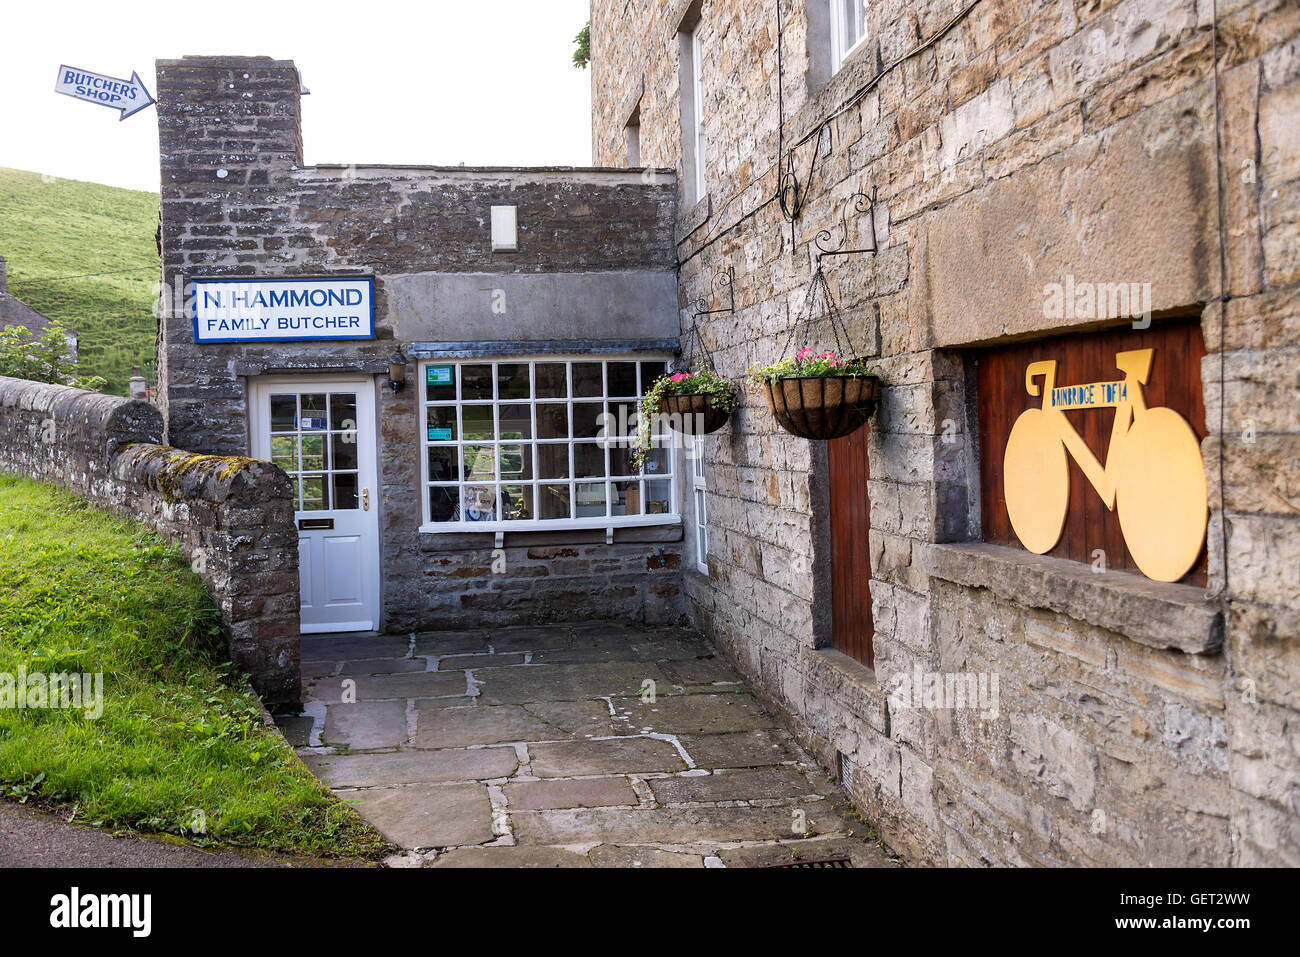 The Family Butchers Shop and Signage for the Tour de France Cycle Race in Bainbridge Yorkshire Dales National Park England United Kingdom UK Stock Photo